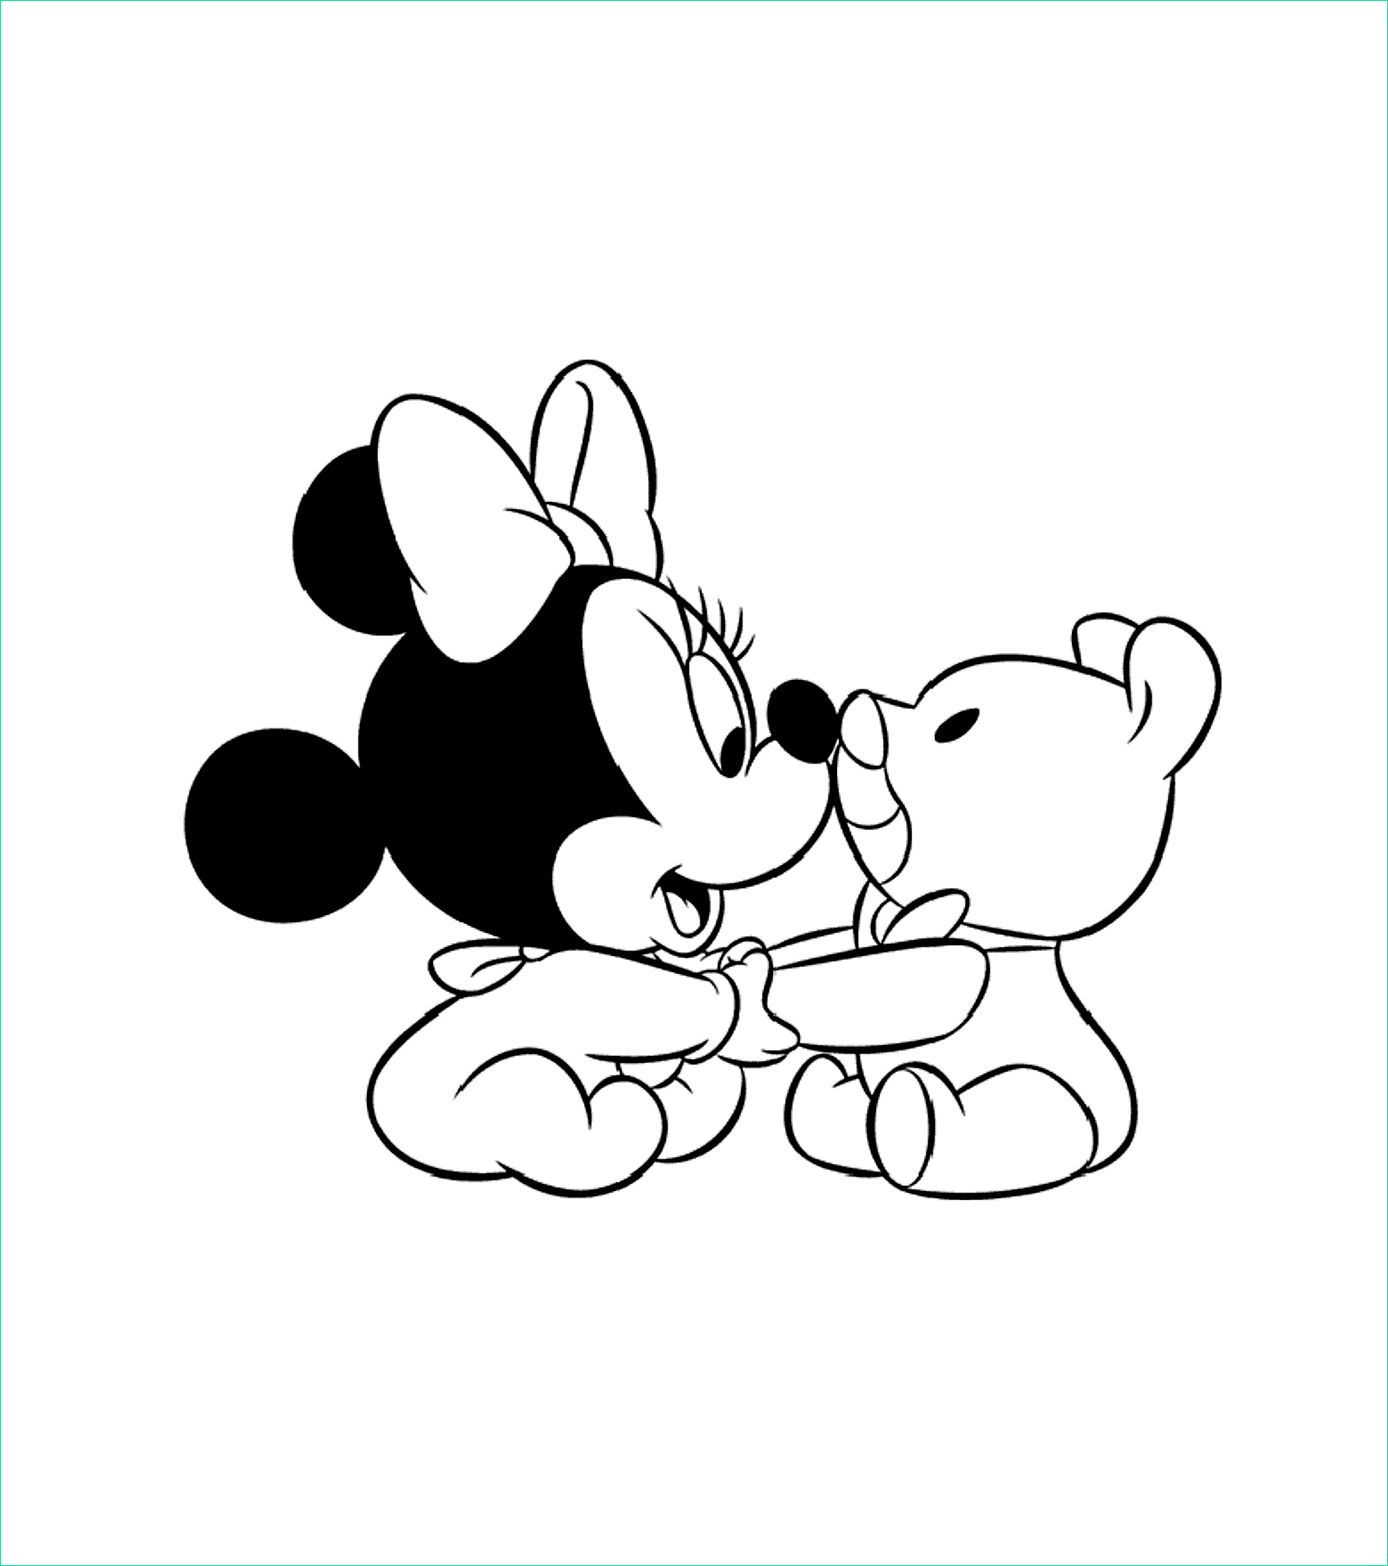 image=minnie Coloring for kids minnie 2